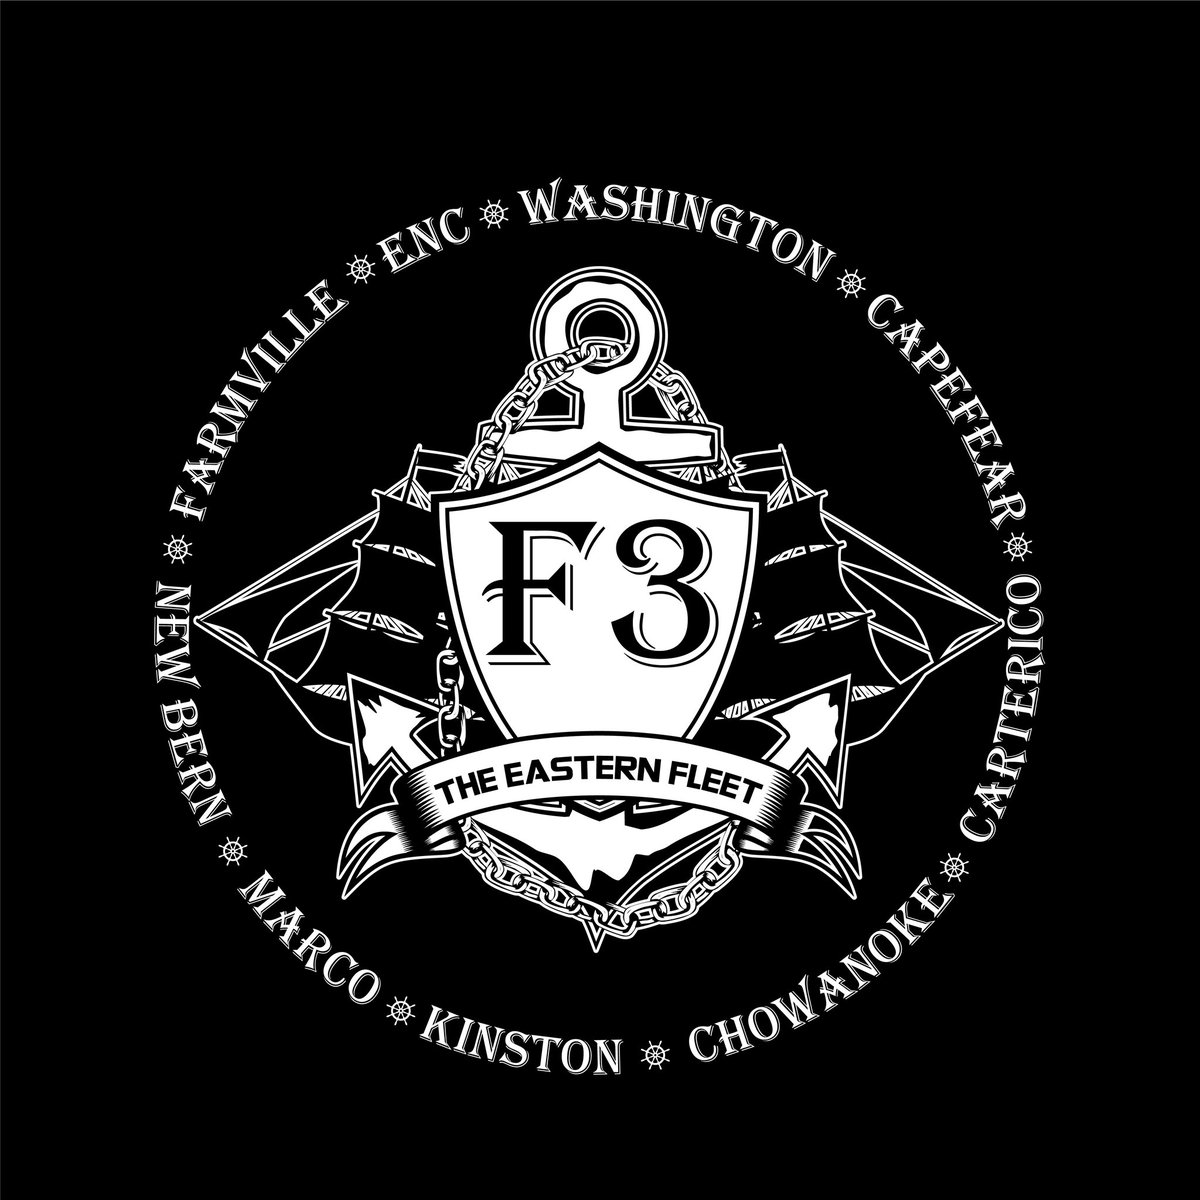 Last #convergence of #cornerstone and #theeasternfleet in @f3washingtonnc!  Let’s get in the #clowncar and roll!  @f3capefear @f3marconc @F3Morehead @f3kinston @F3NewBern @F3Farmville @f3chowanoke